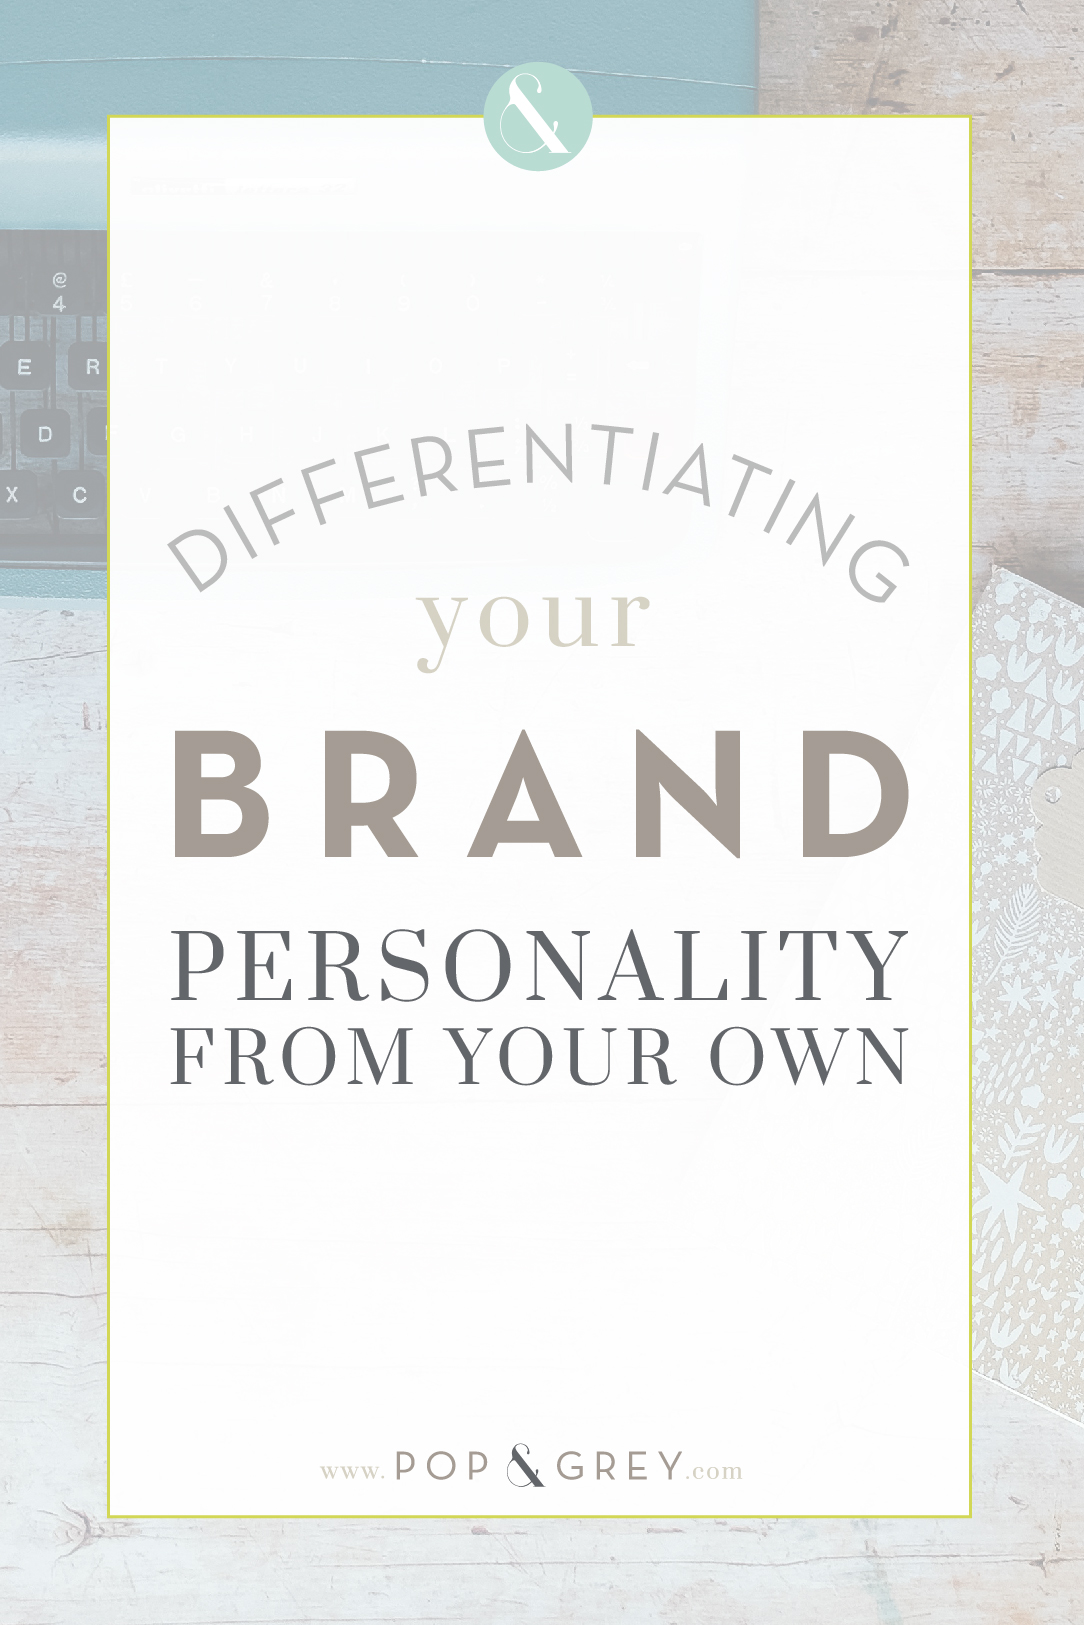 Differentiating your brand personality from your own by Pop and Grey - personal brand personality